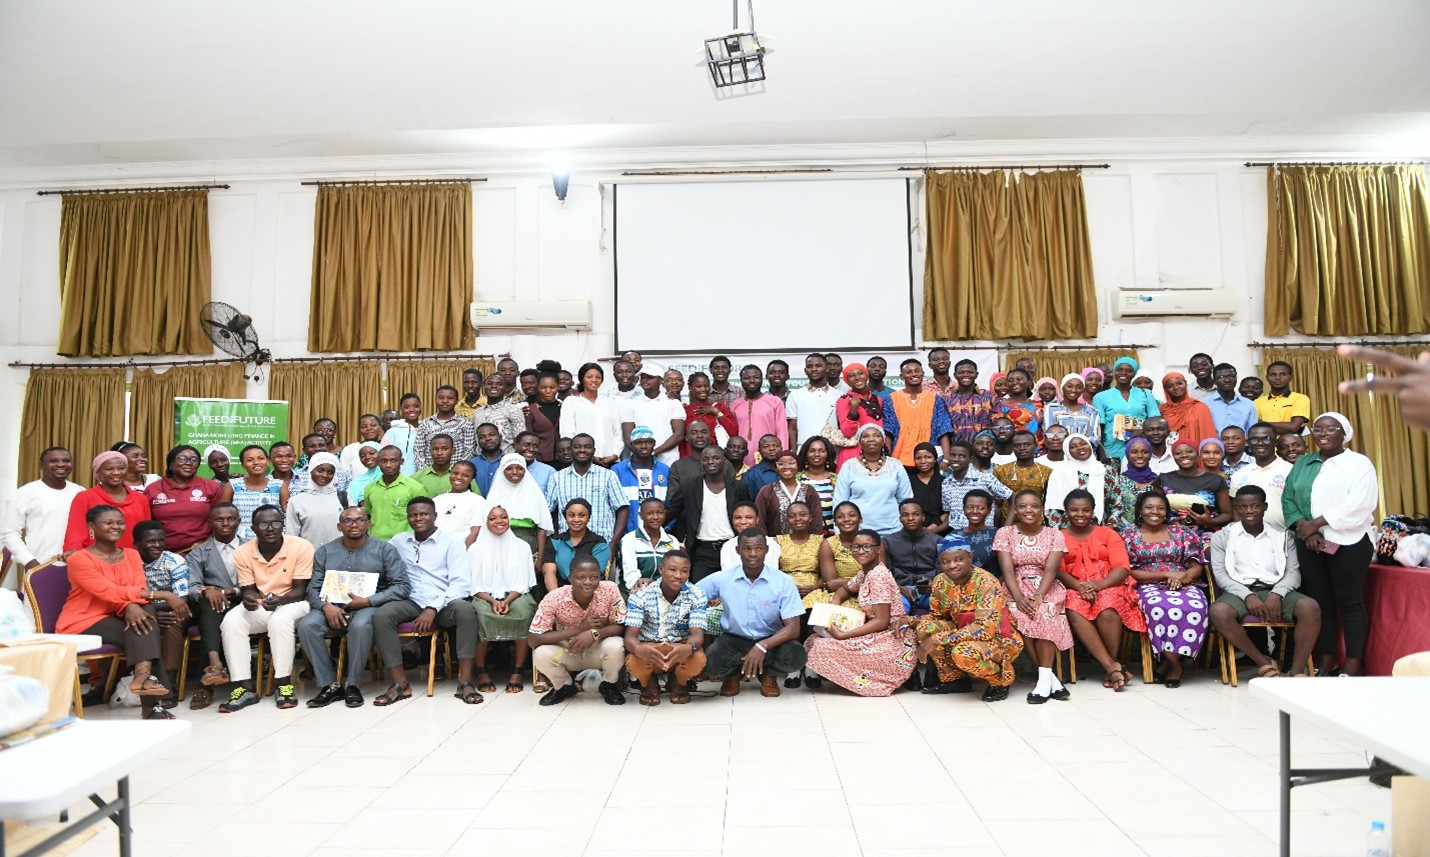 Feed the Future Ghana Policy LINK Partners CAPPS-UDS, MSR and MFA to Commemorate International Youth Day with Youth Policy Dialogue and Agribusiness Seminar